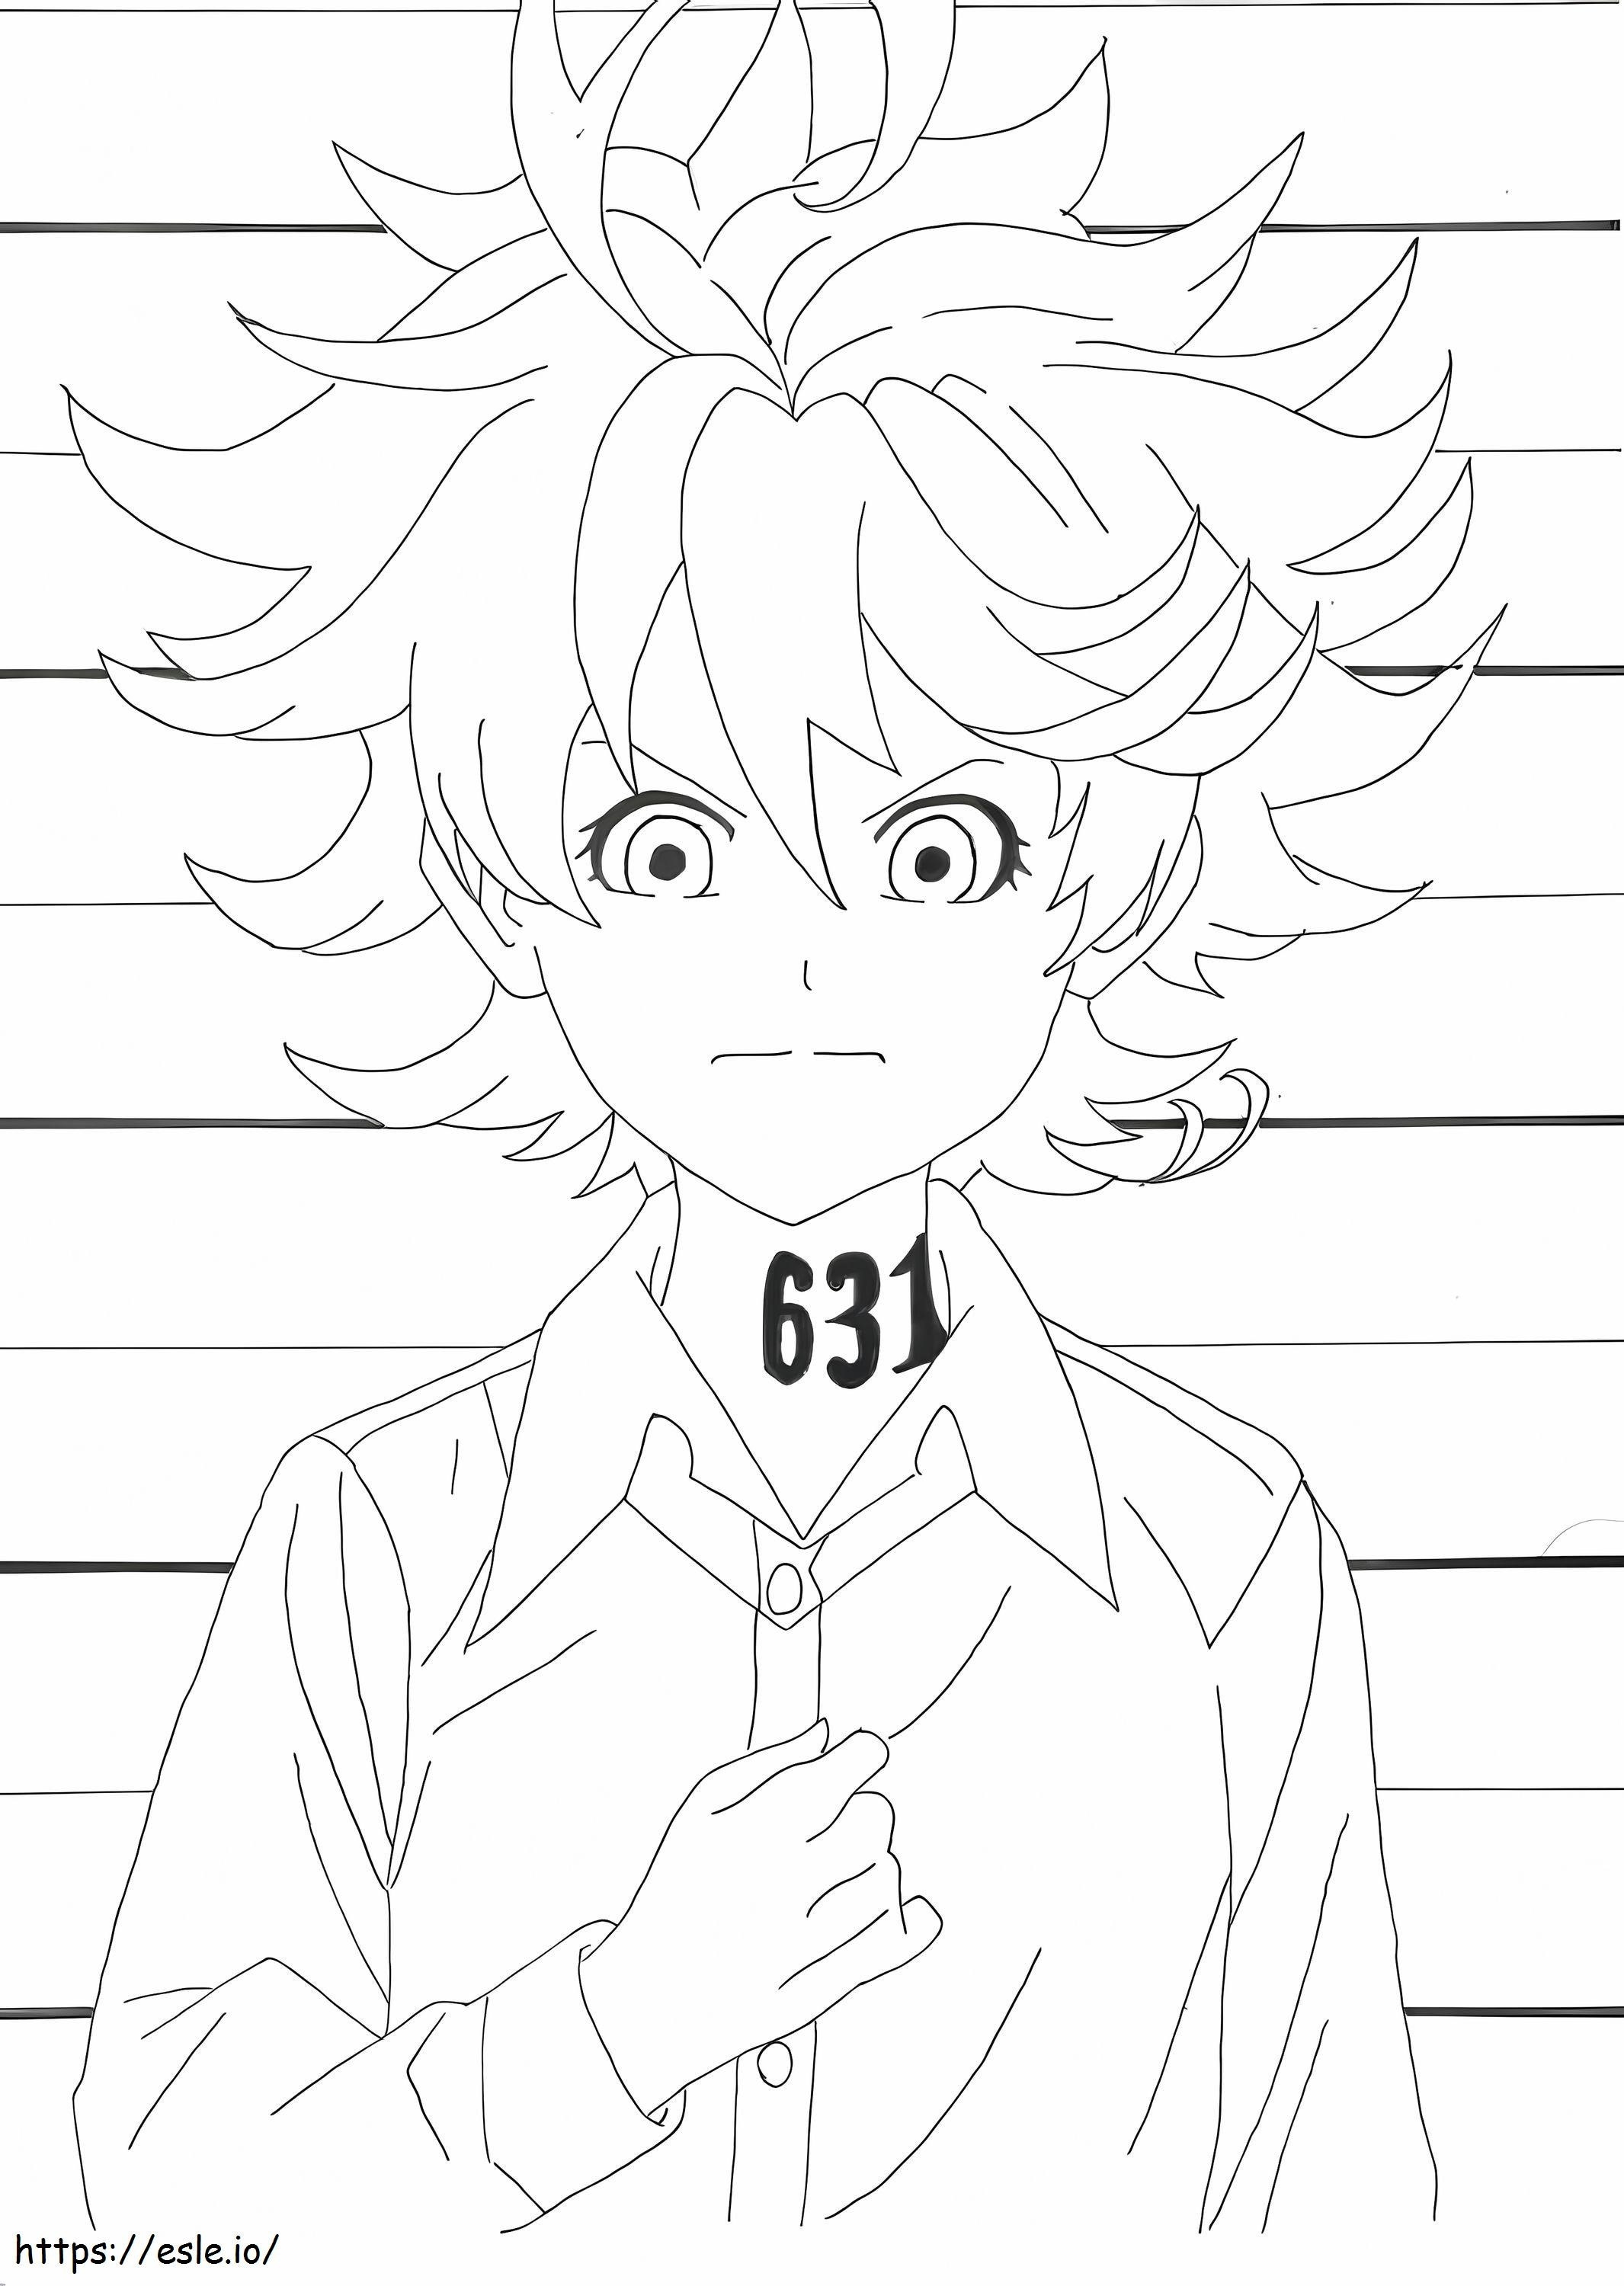 Emma Of The Promised Neverland coloring page